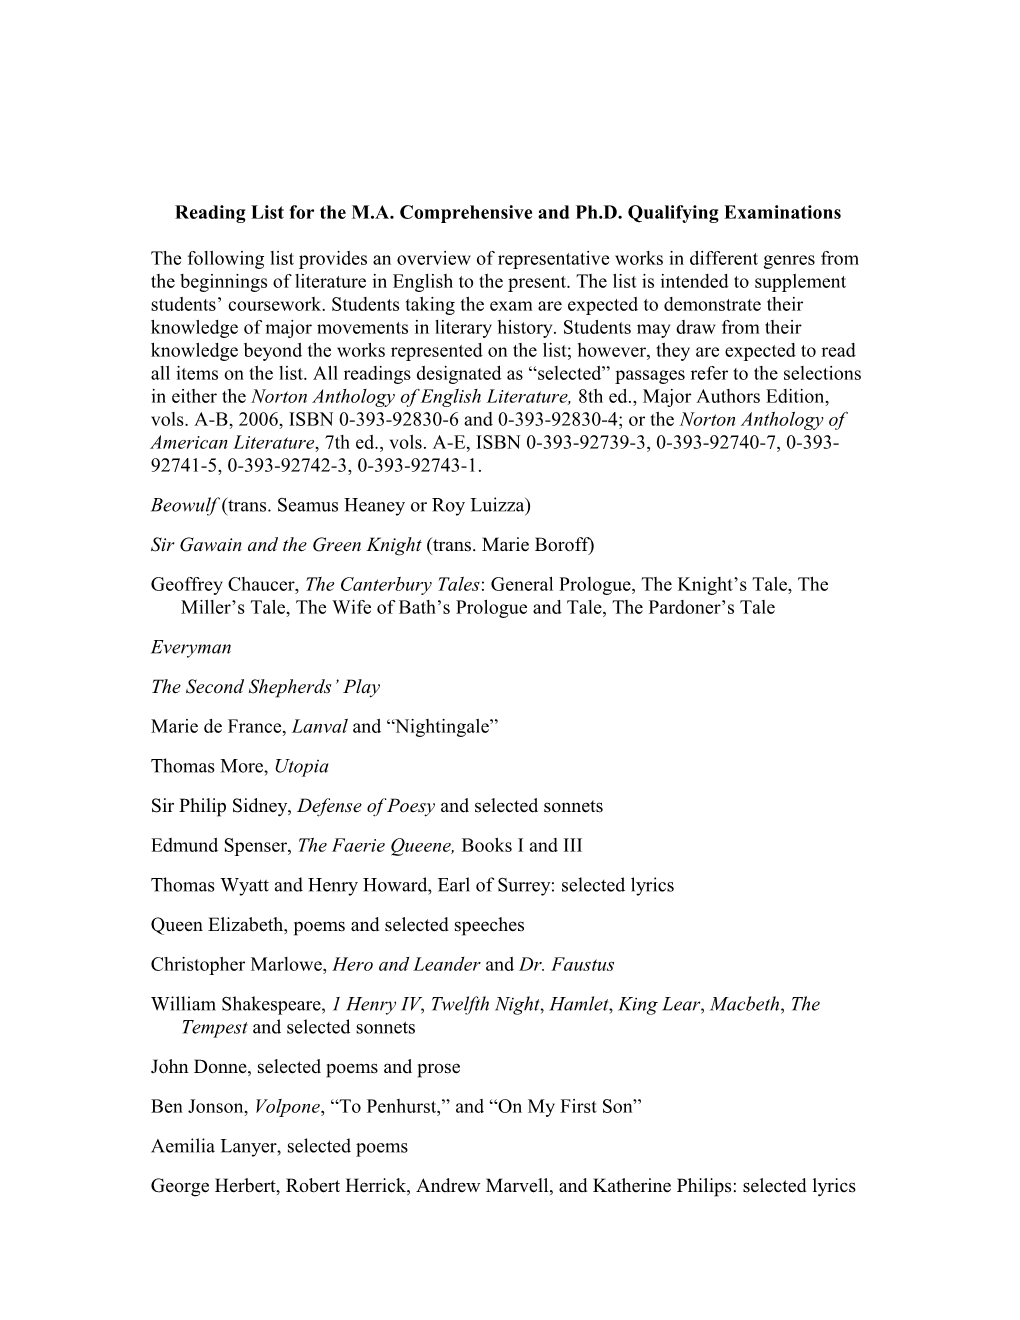 Reading List for the M.A. Comprehensive and Ph.D. Qualifying Examinations